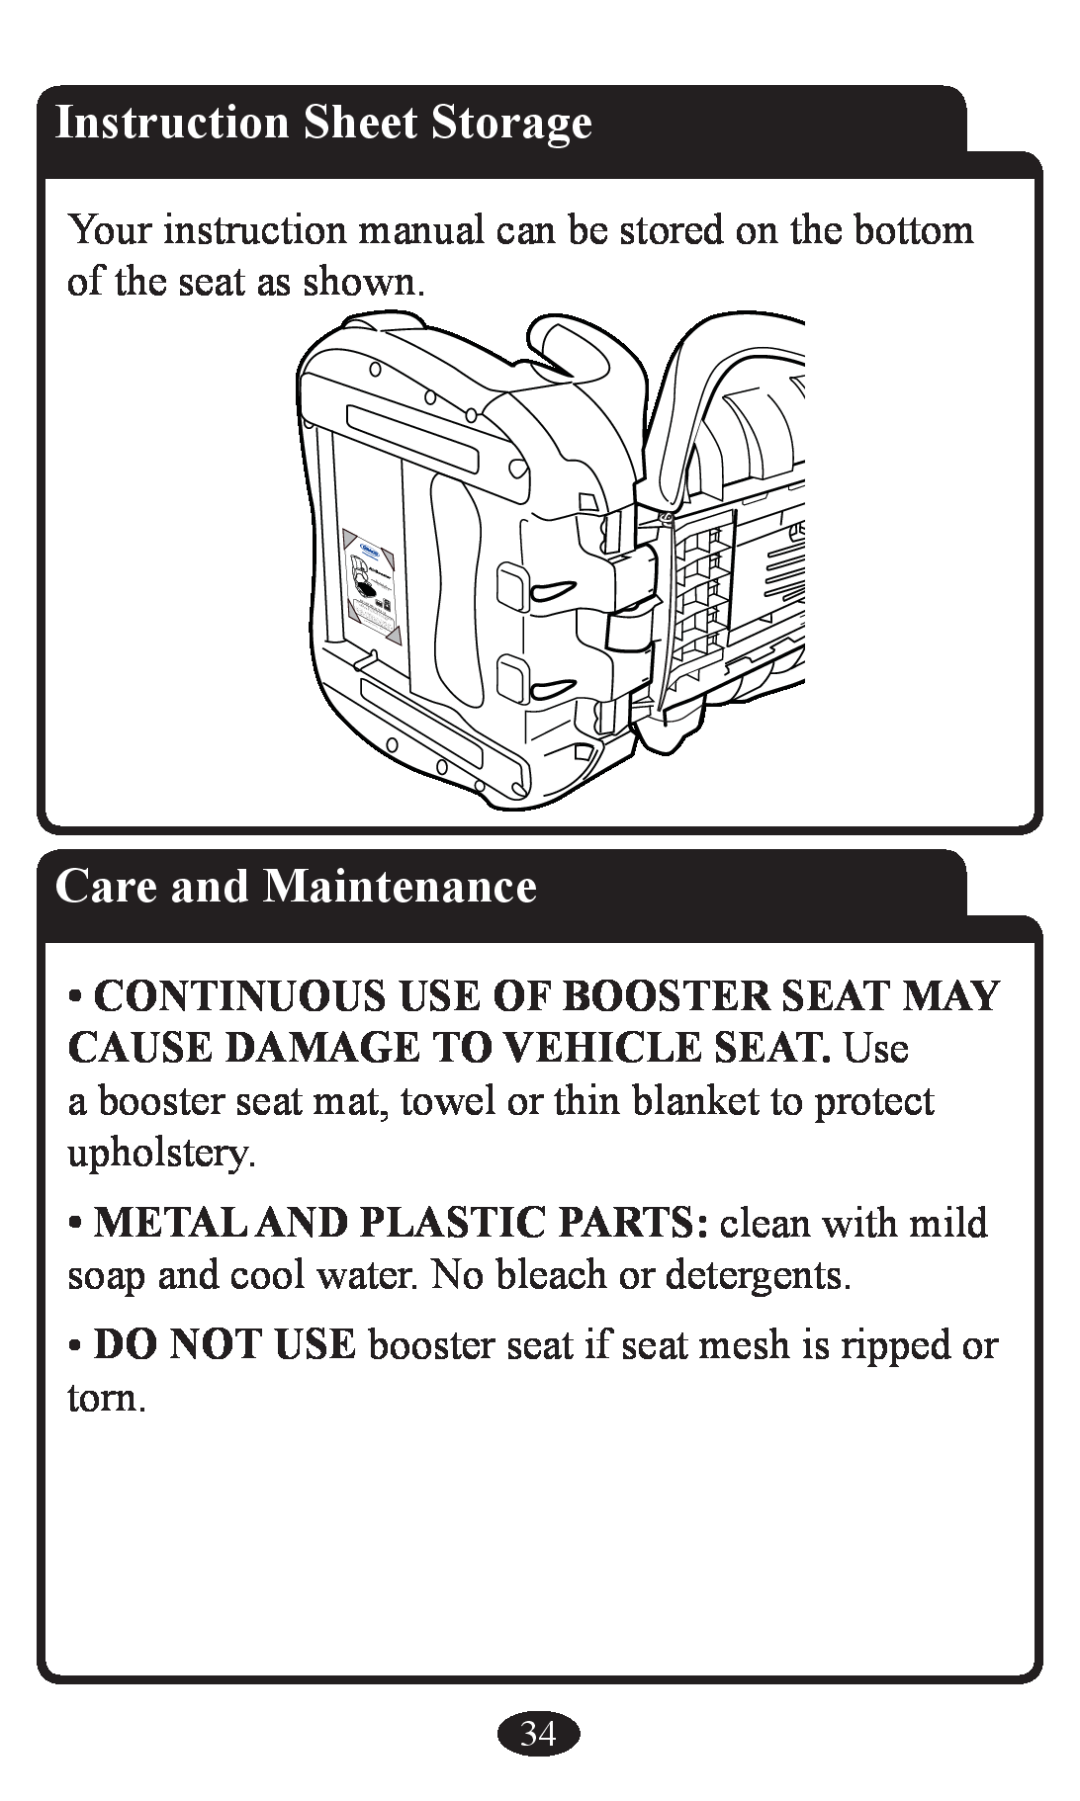 Graco Booster Seat owner manual Instruction Sheet Storage, Care and Maintenance 